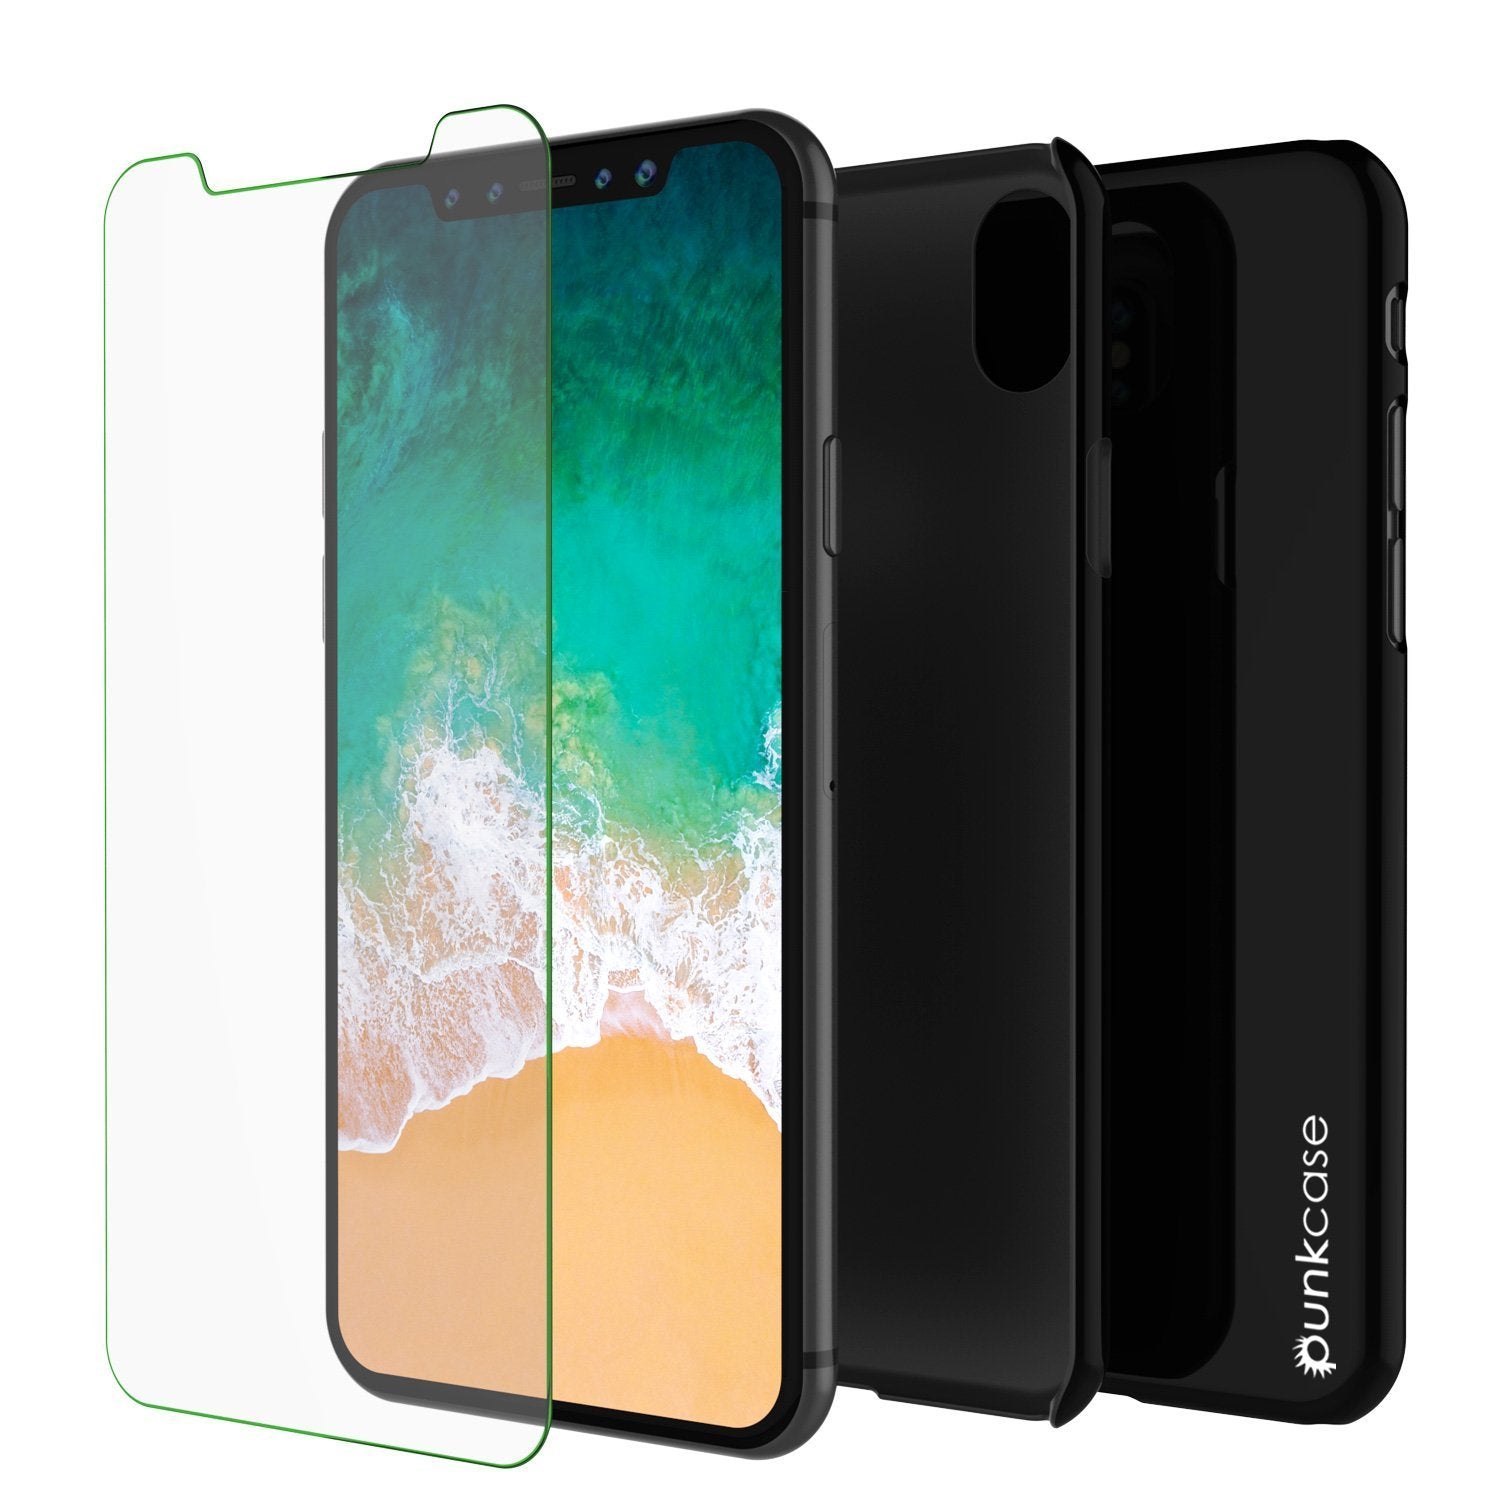 iPhone X Case, Punkcase [Solid Series] Ultra Thin Cover [shockproof] [dirtproof] for Apple iPhone 10 [jet black]